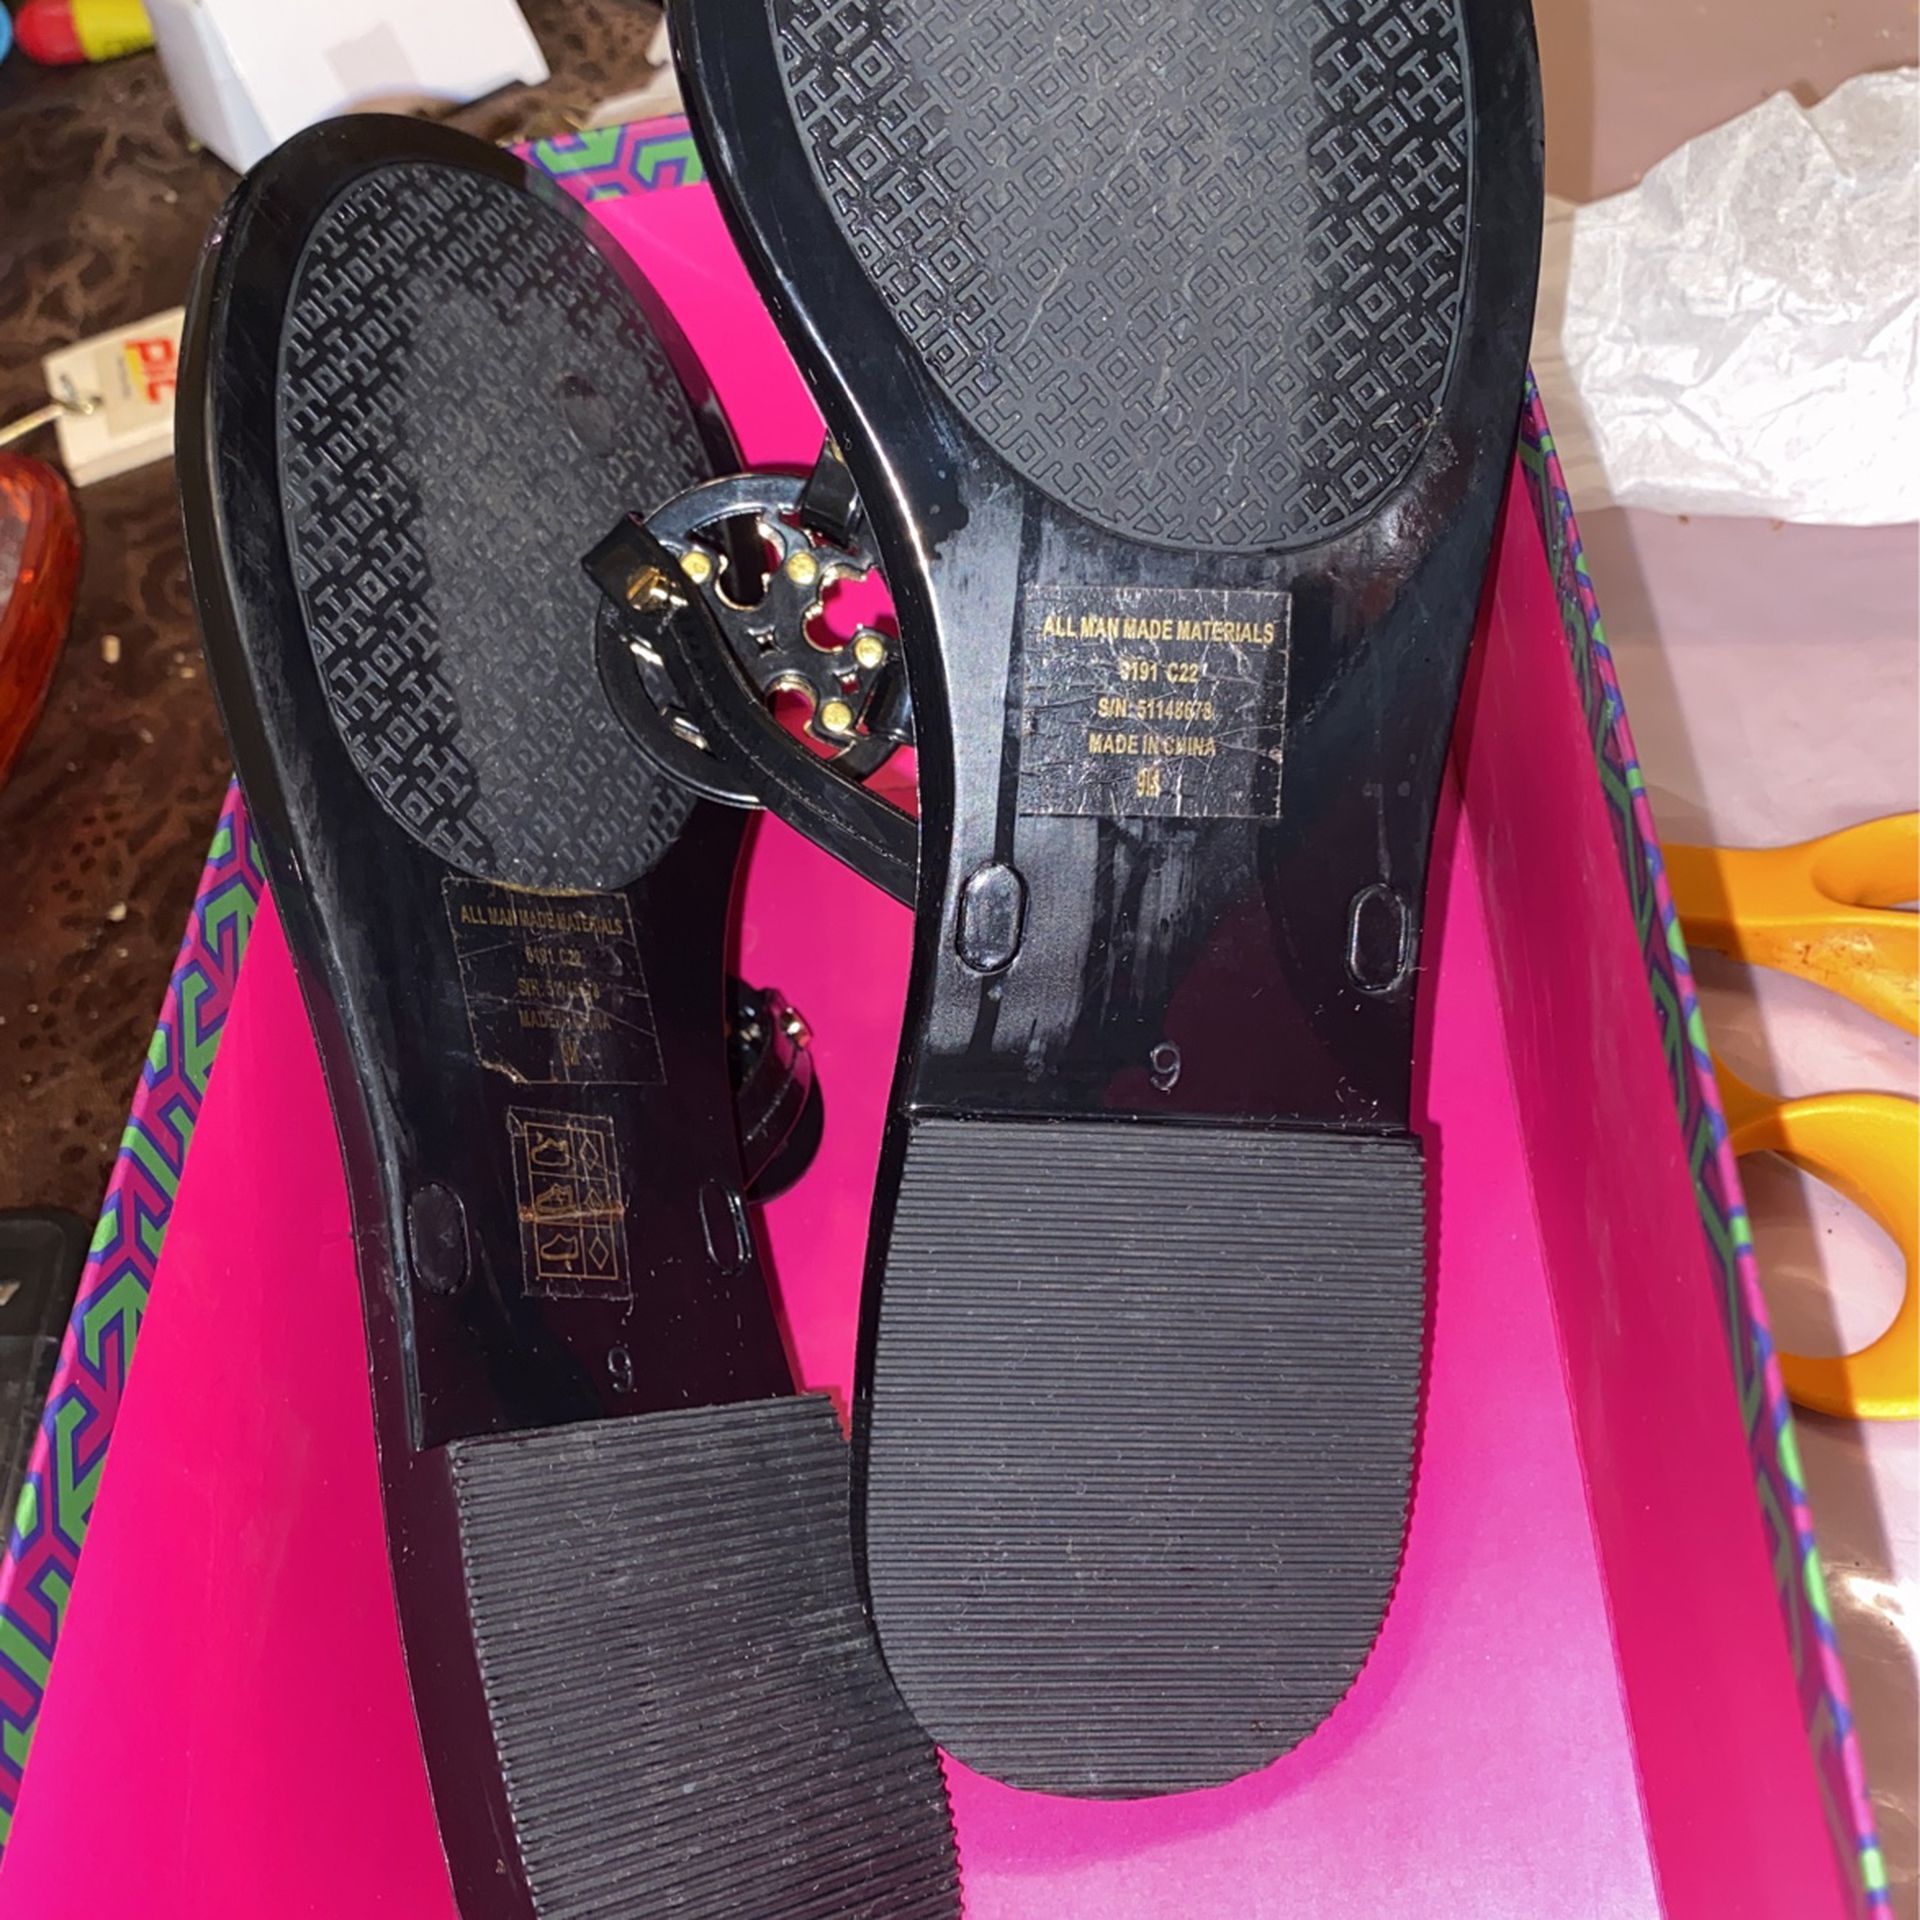 Tory Burch Sandals for Sale in Cleveland, OH - OfferUp